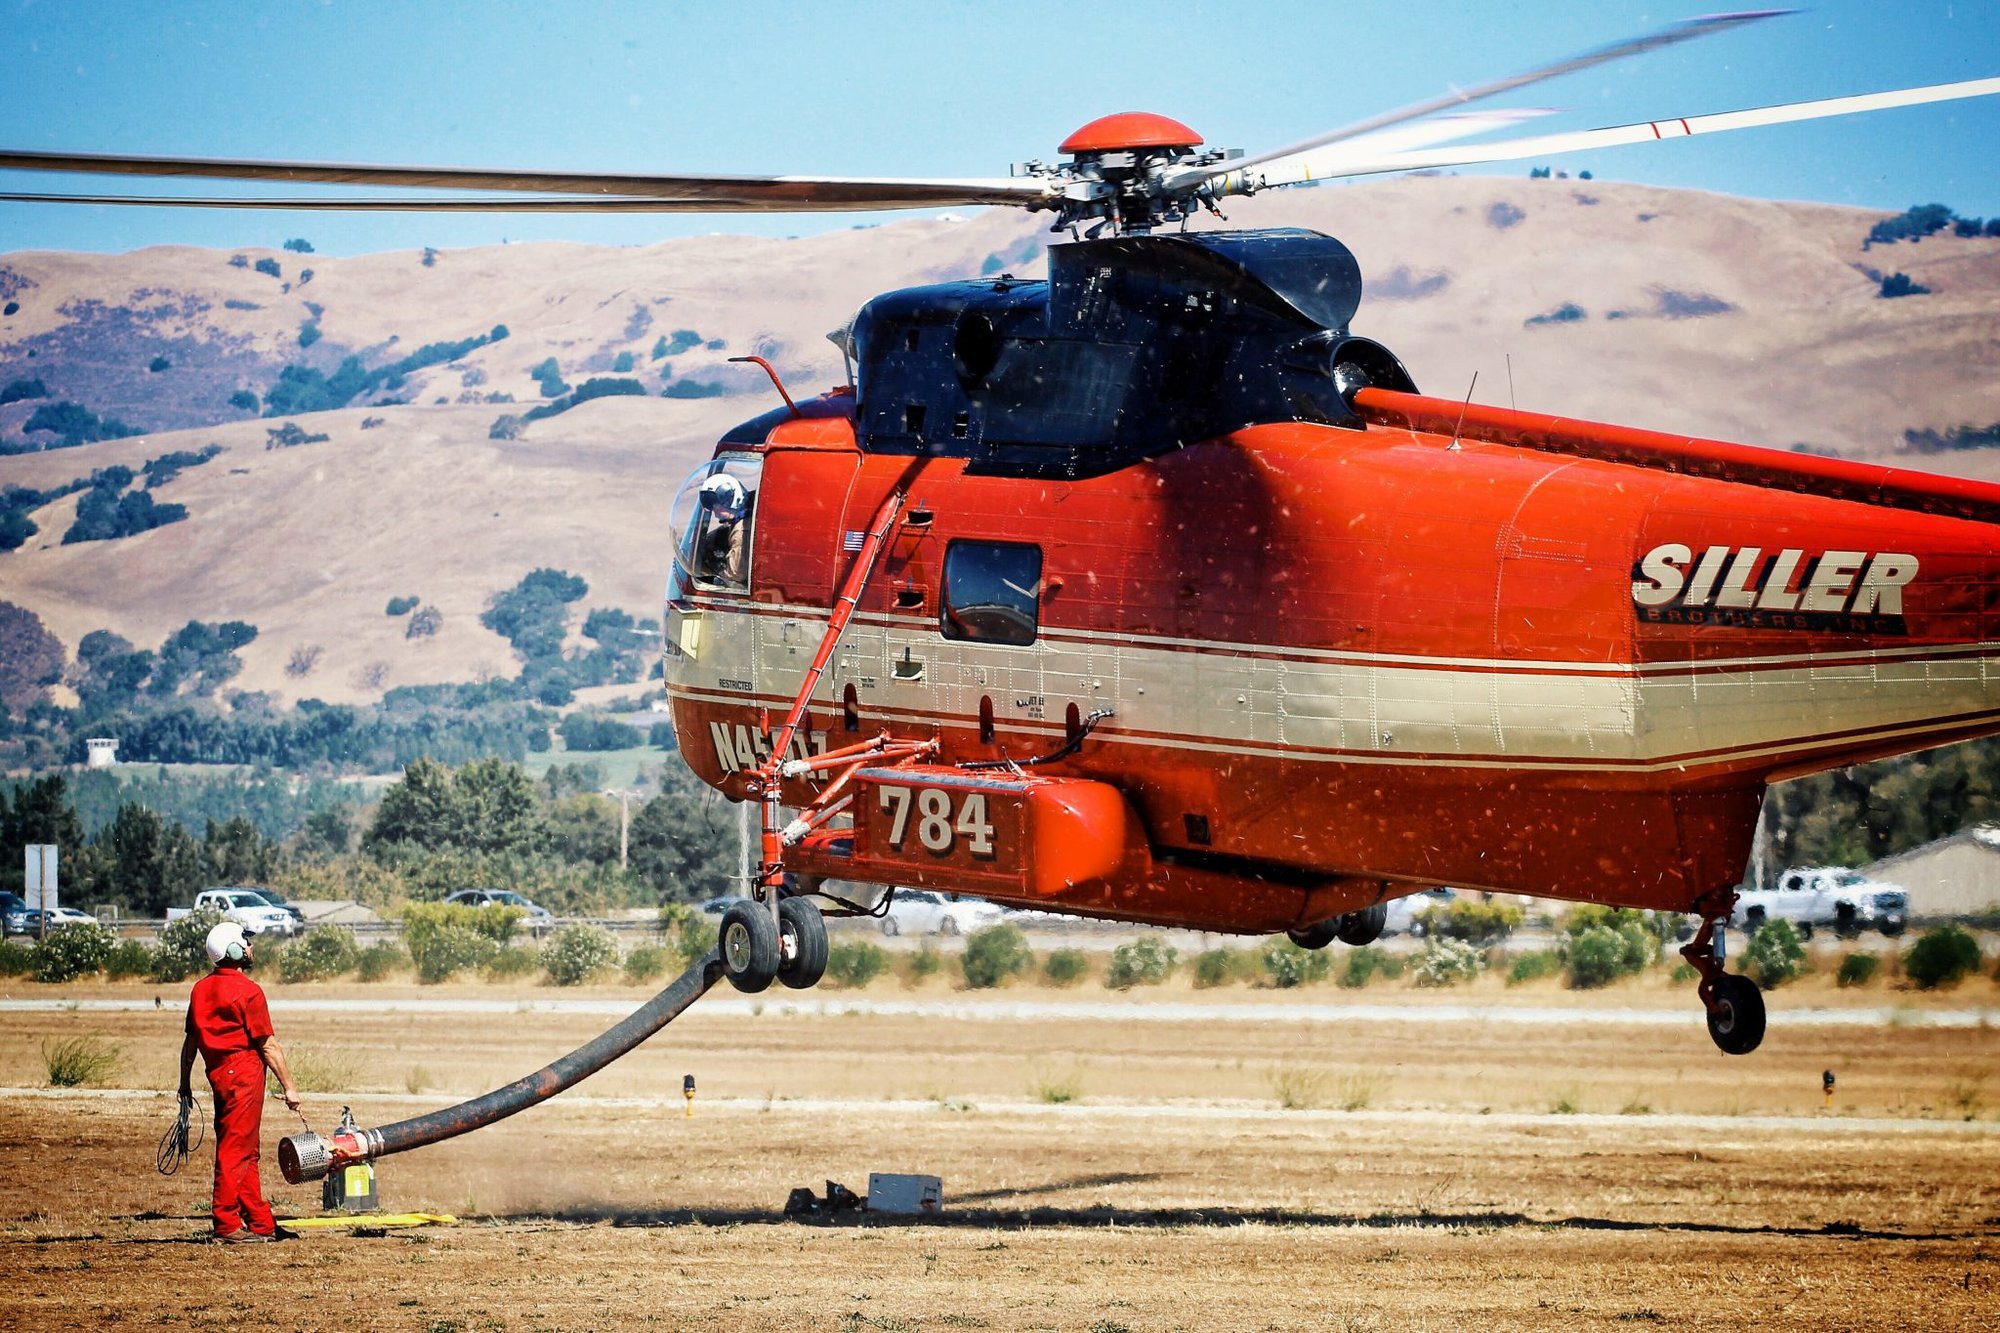 Firefighter helicopter hovering. Photo courtesy of Unsplash.